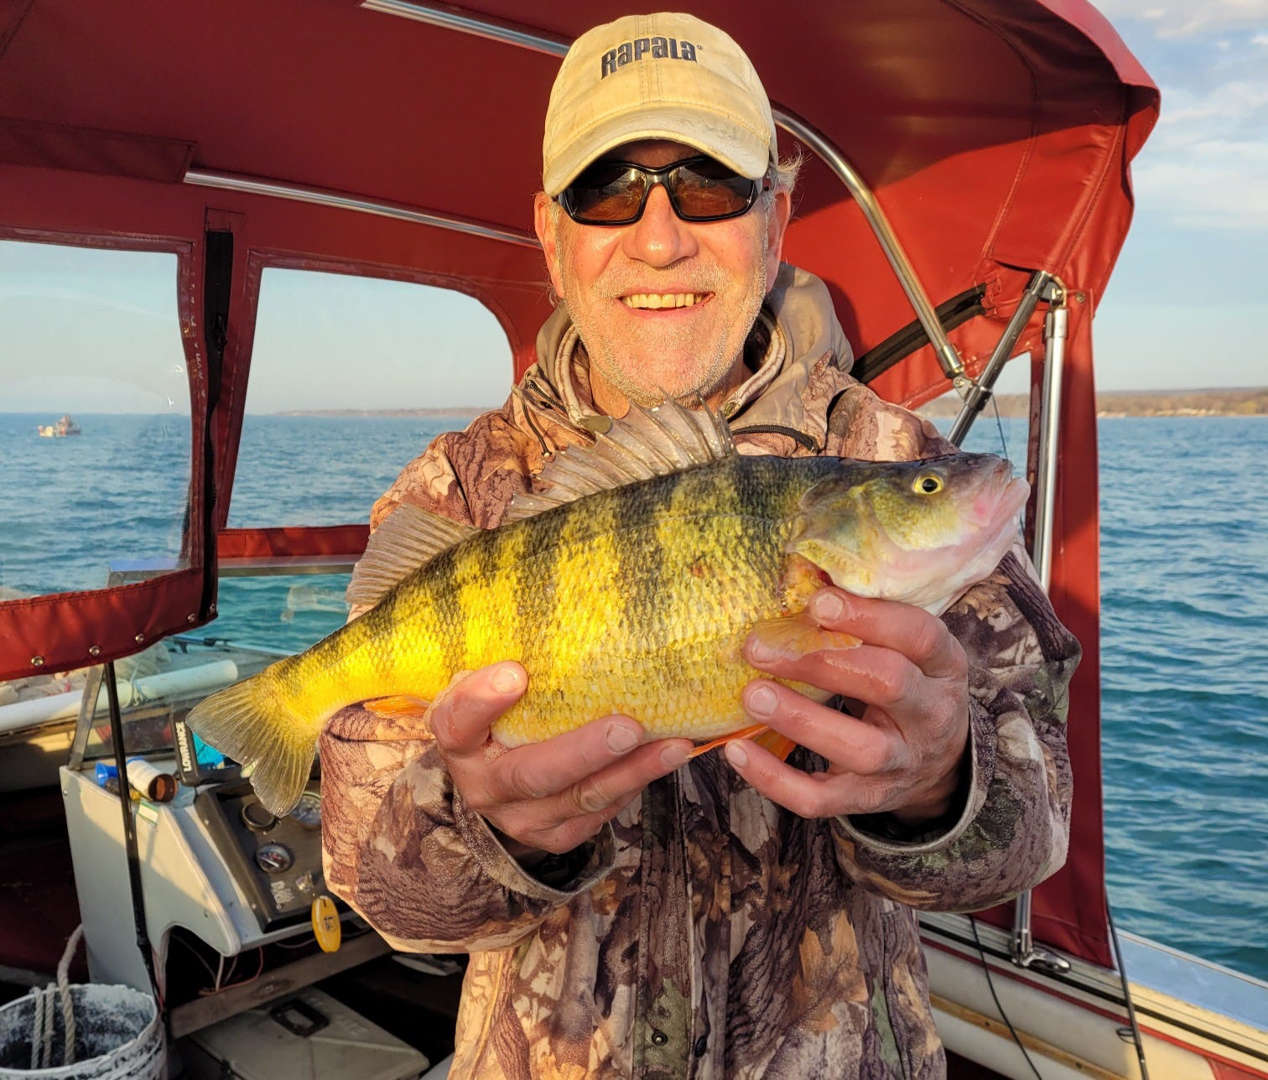 Man catches the state-record perch for Pennsylvania.